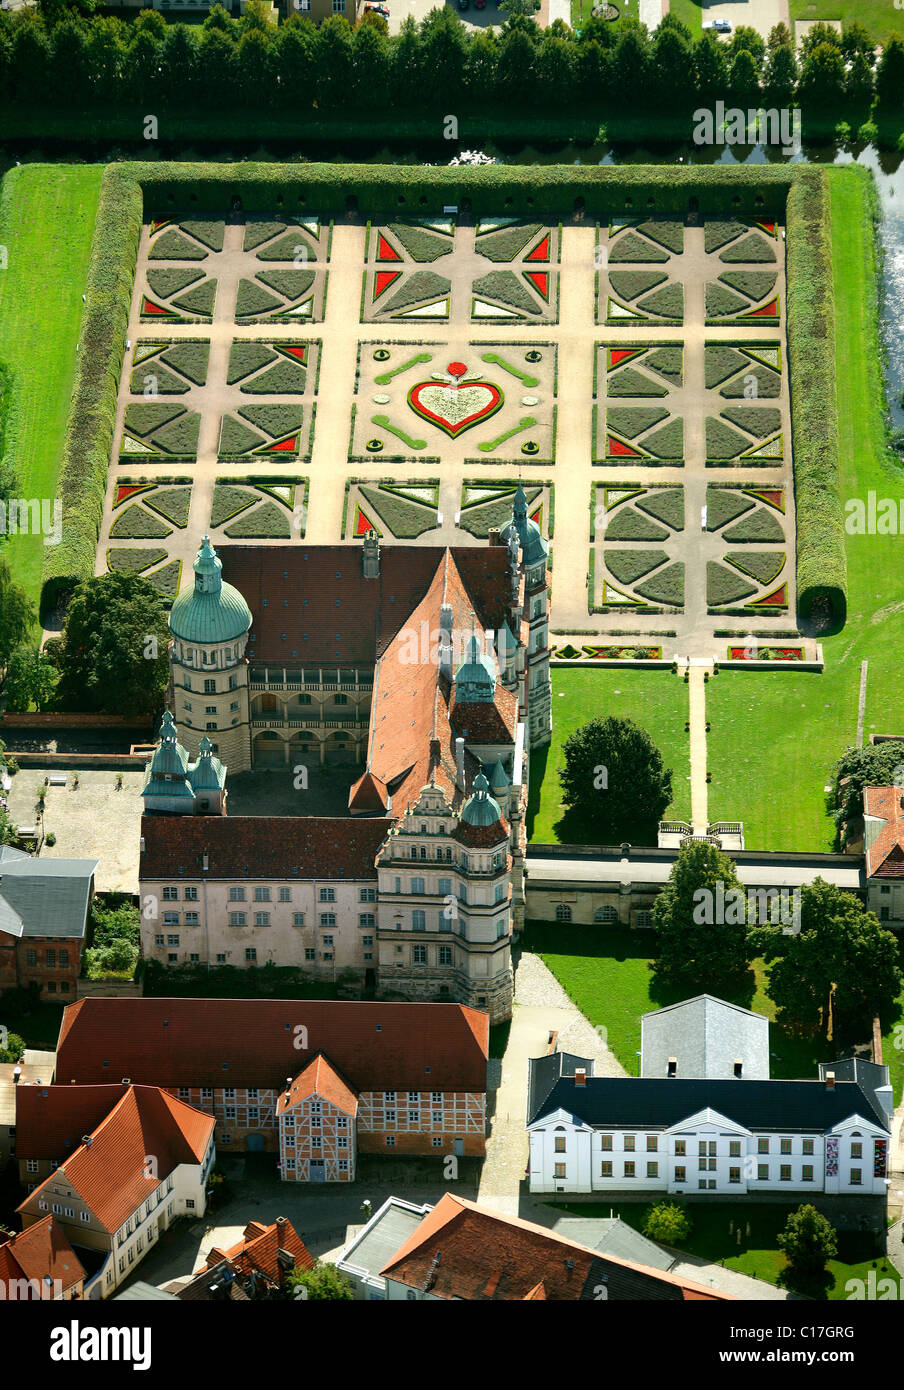 Areal view, Guestrow Castle, baroque garden, Barlachstadt, Guestrow, Mecklenburg-Western Pomerania, Germany, Europe Stock Photo